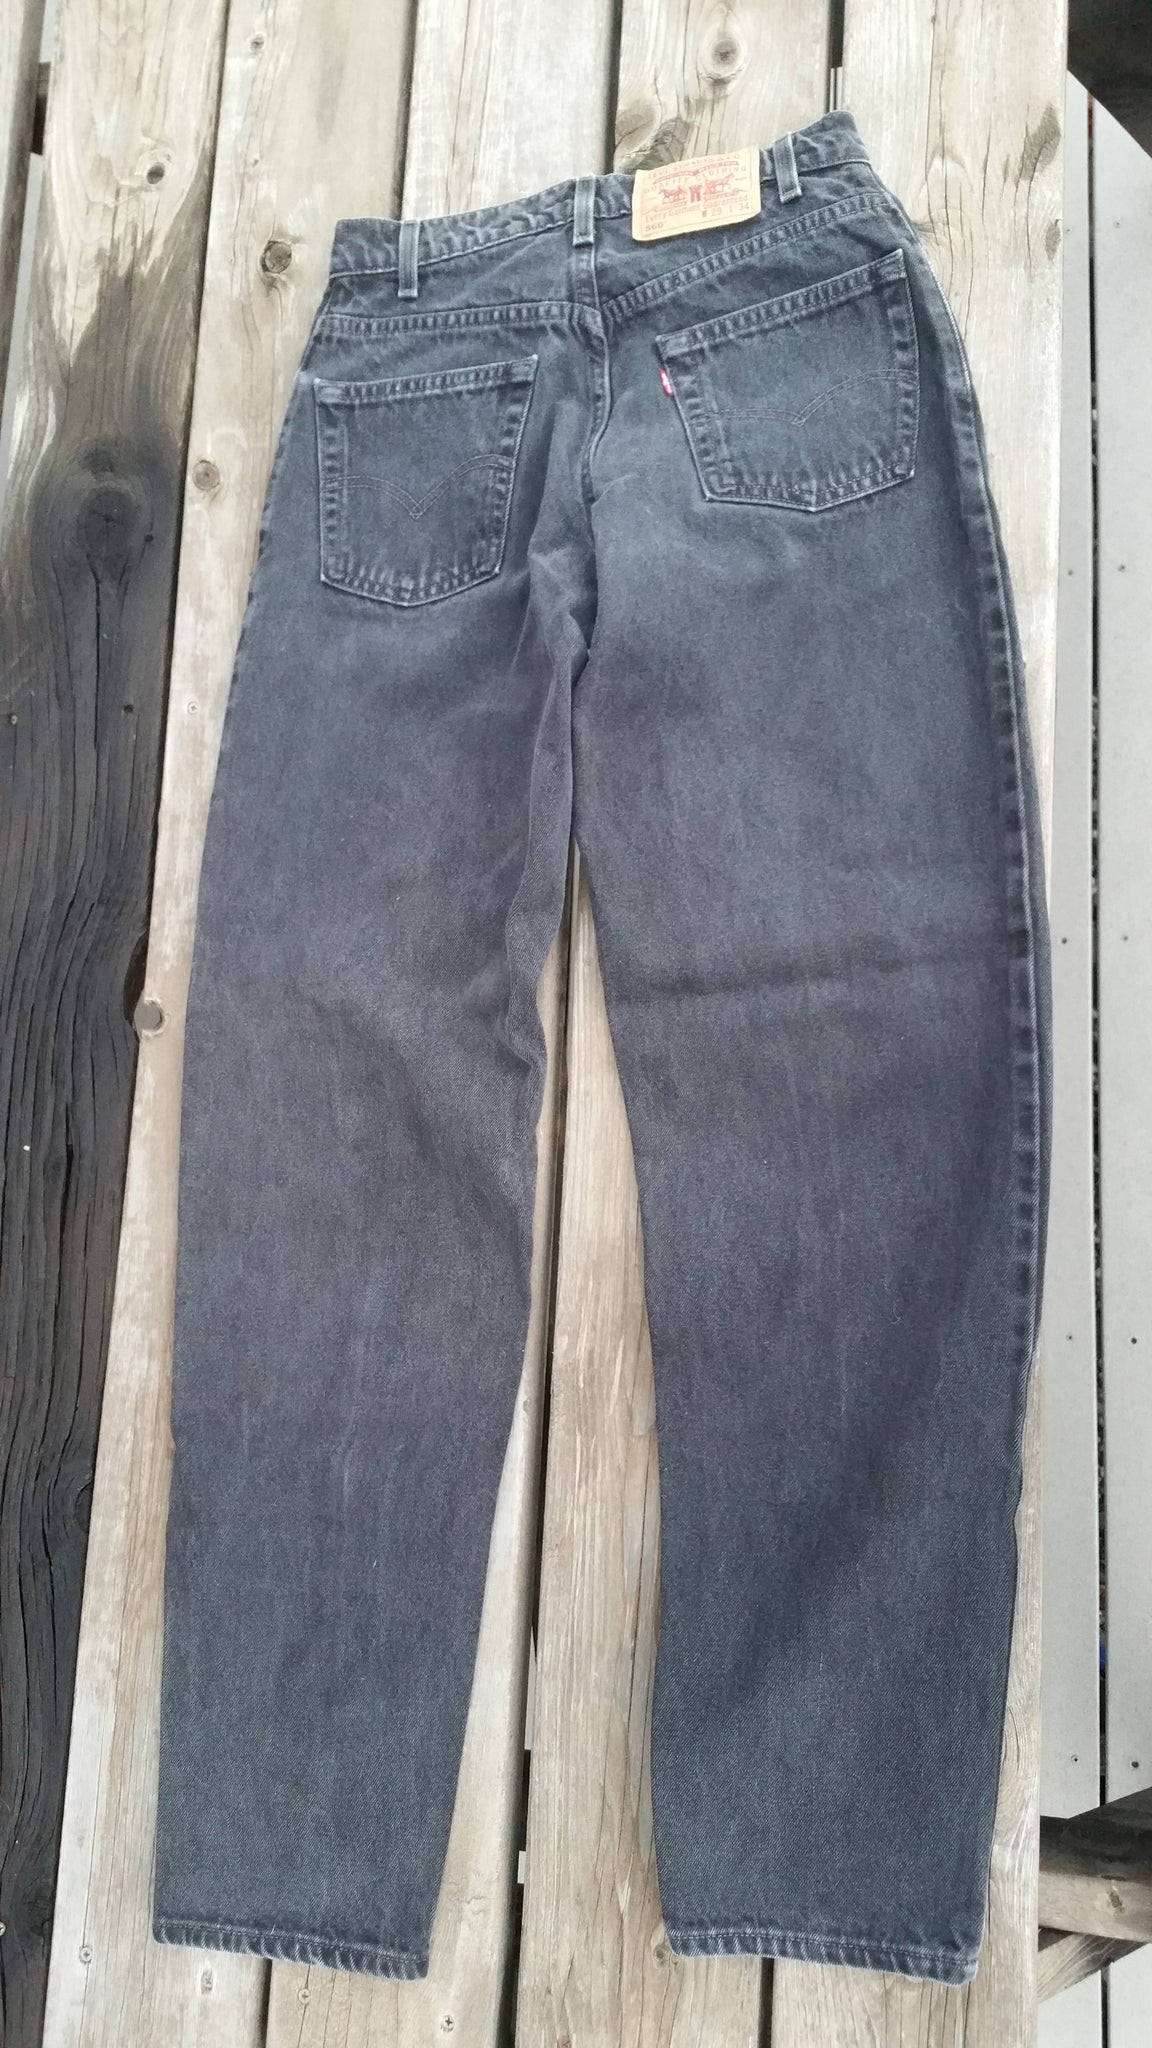 29x34 jeans